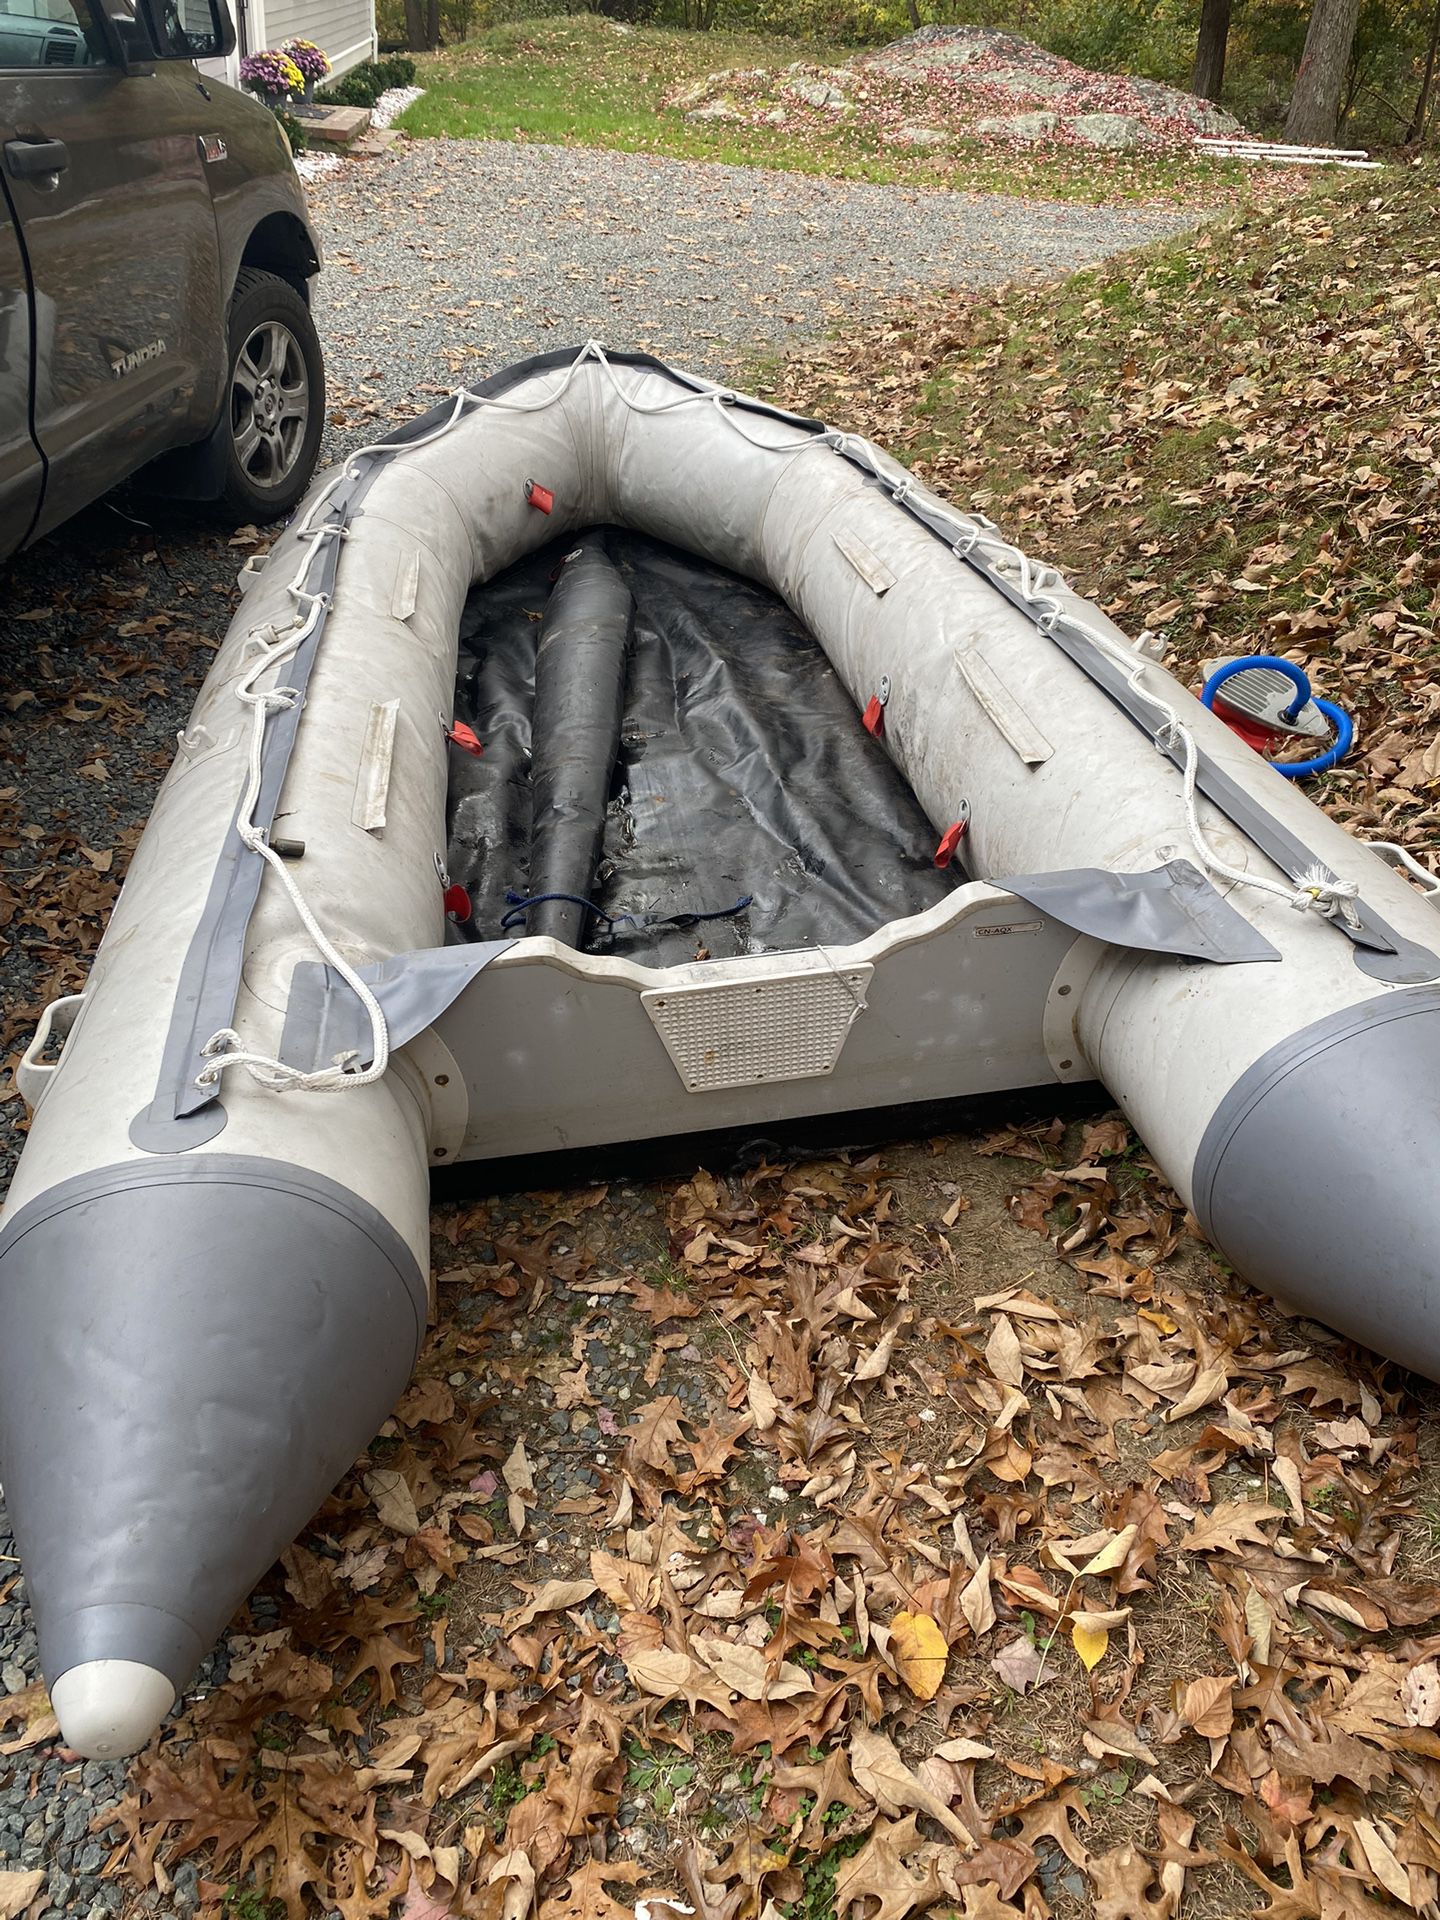 16’ inflatable 